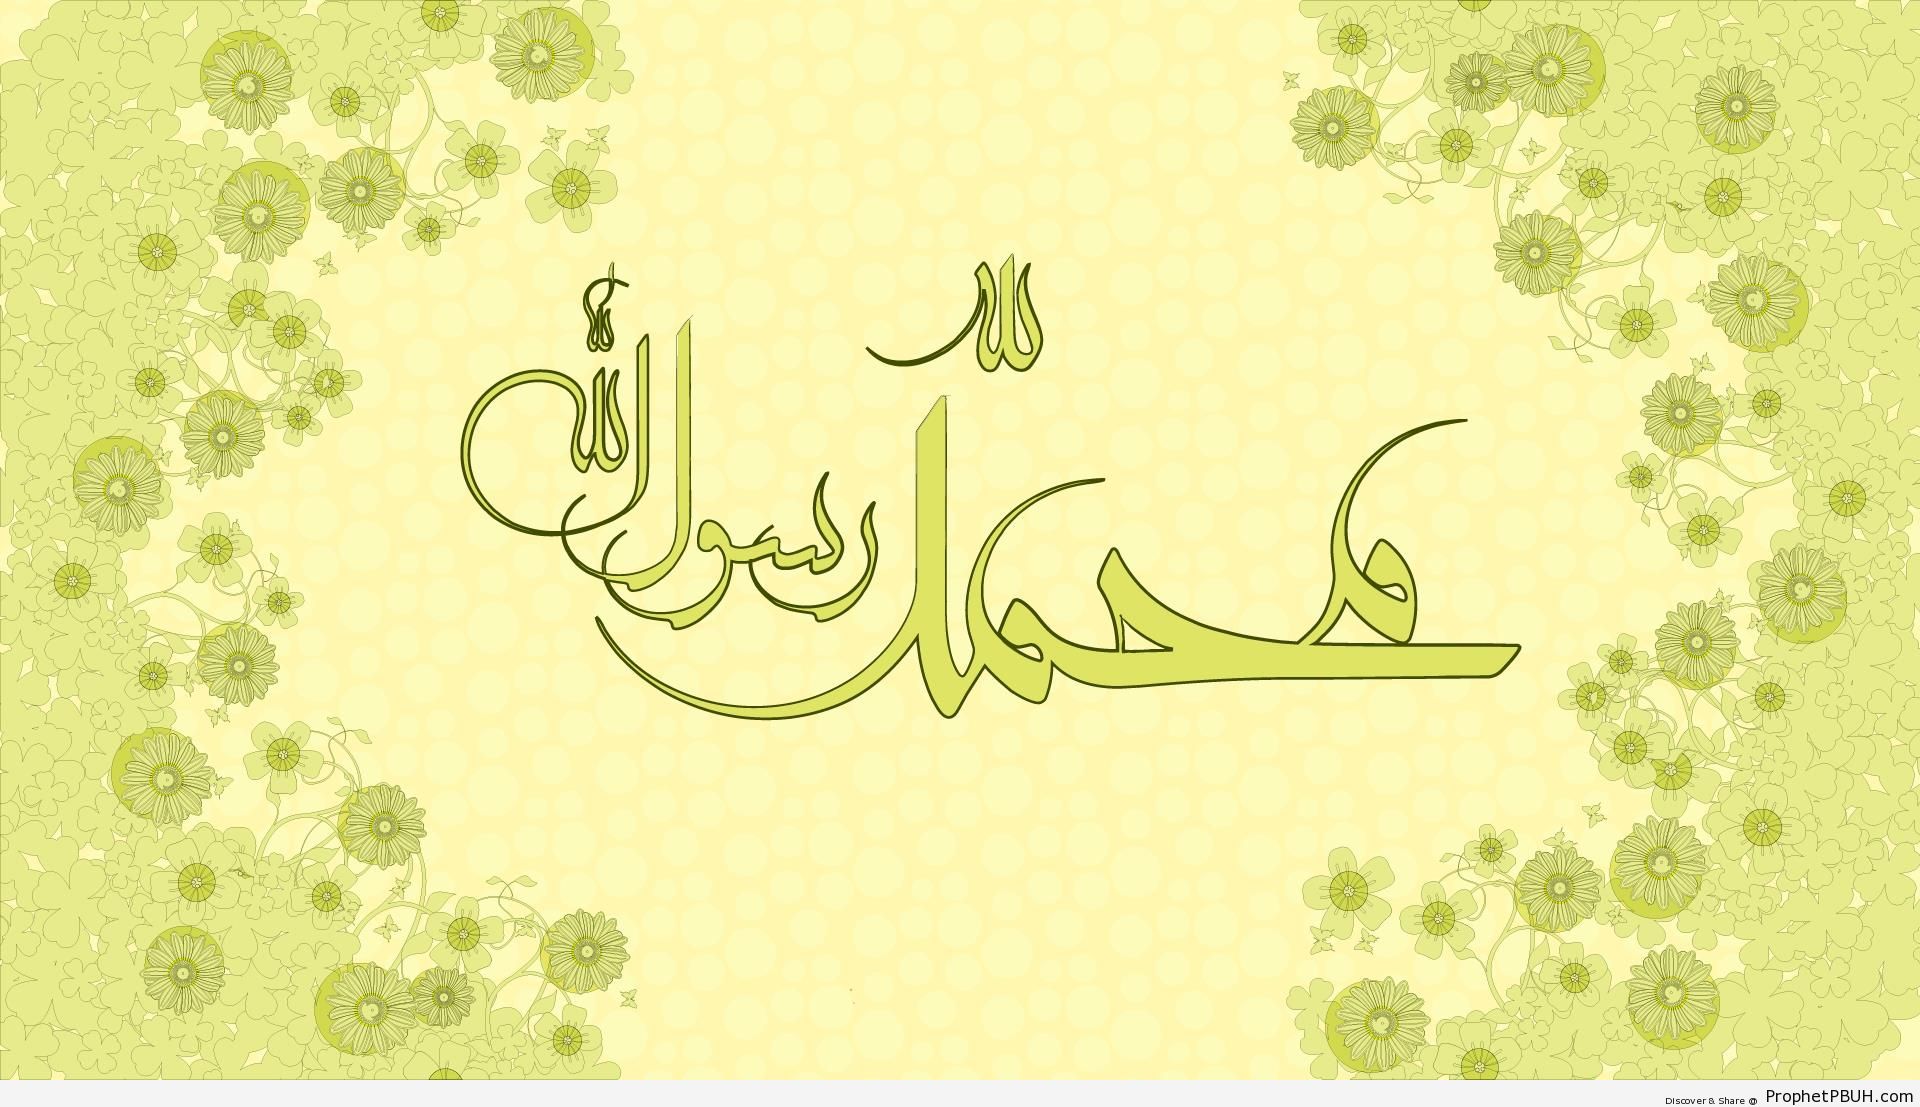 Muhammad is the Messenger of Allah (Quran Calligraphy) - Islamic Calligraphy and Typography 